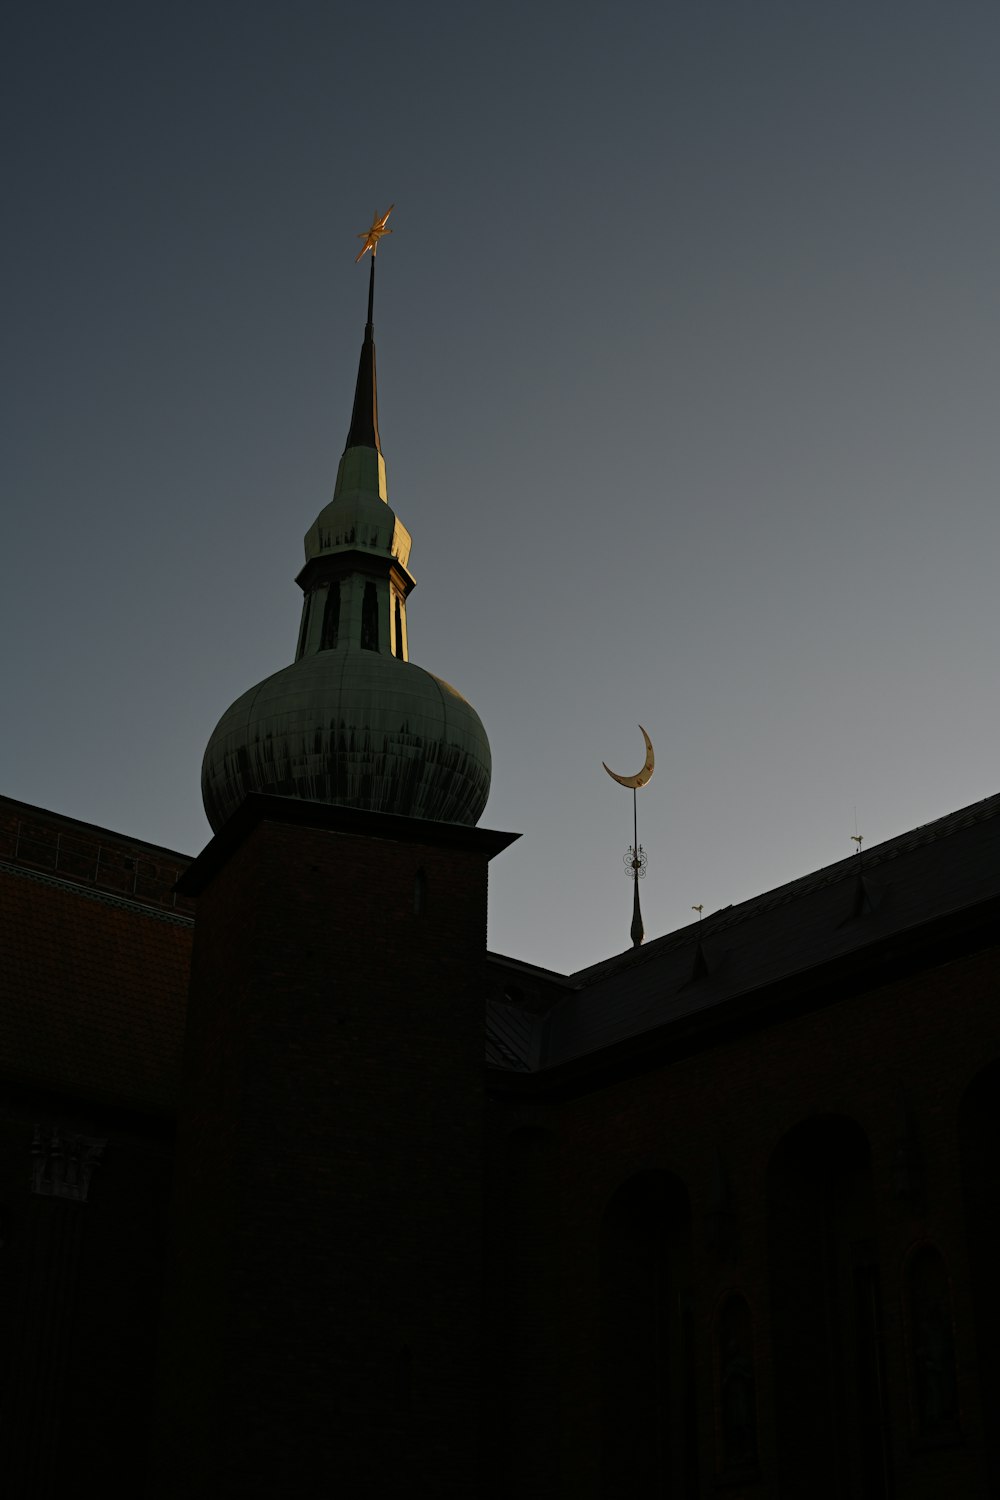 a building with a steeple and a crescent moon